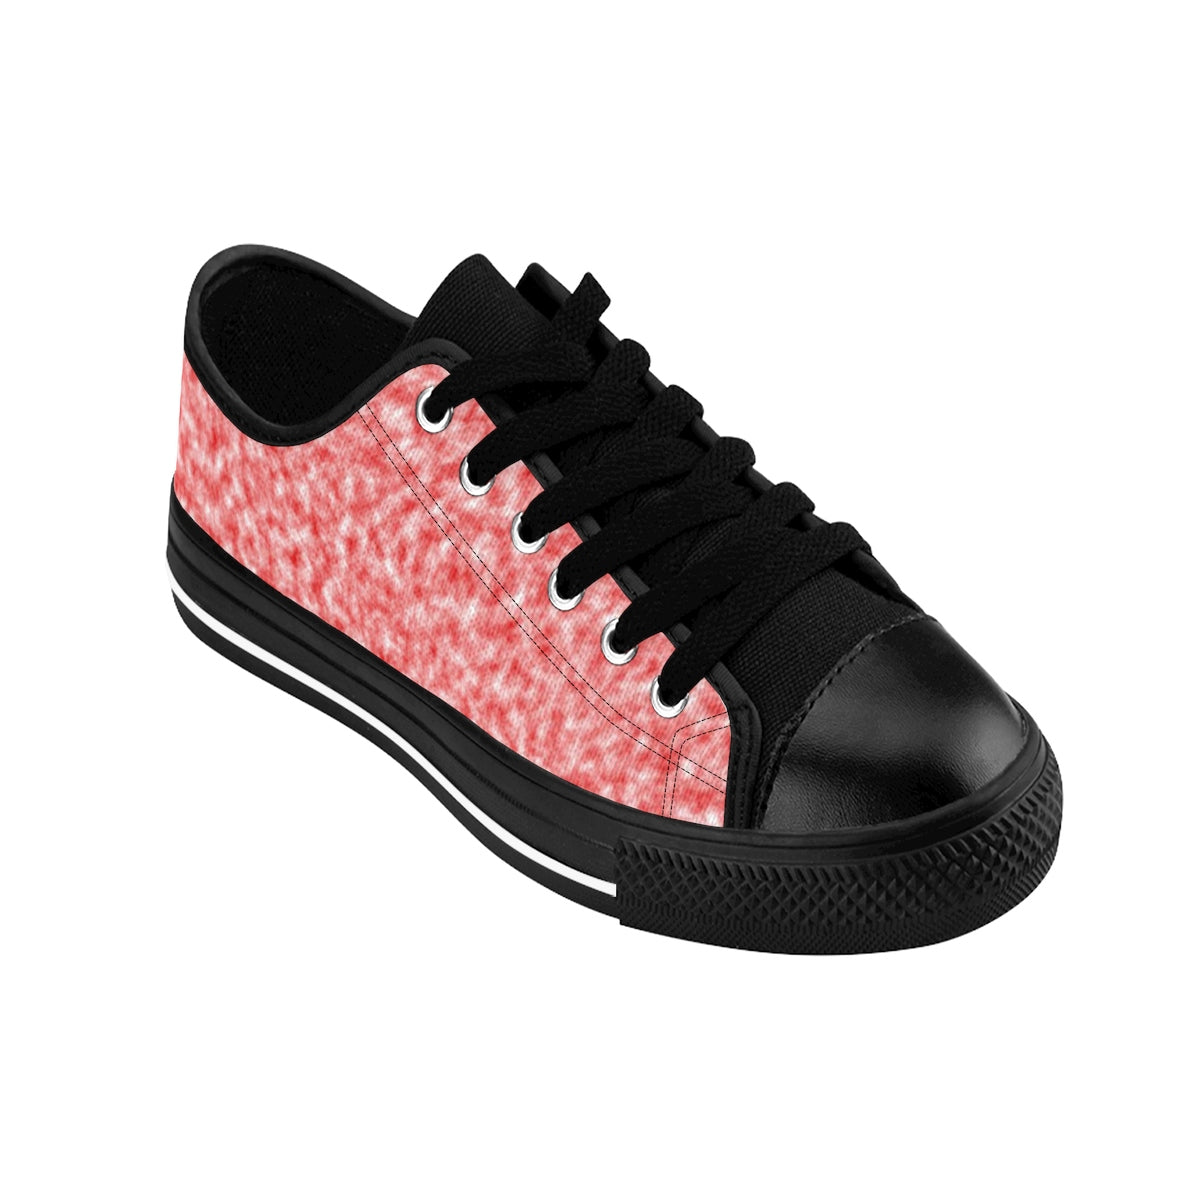 Awesome and White Clouds Women's Sneakers